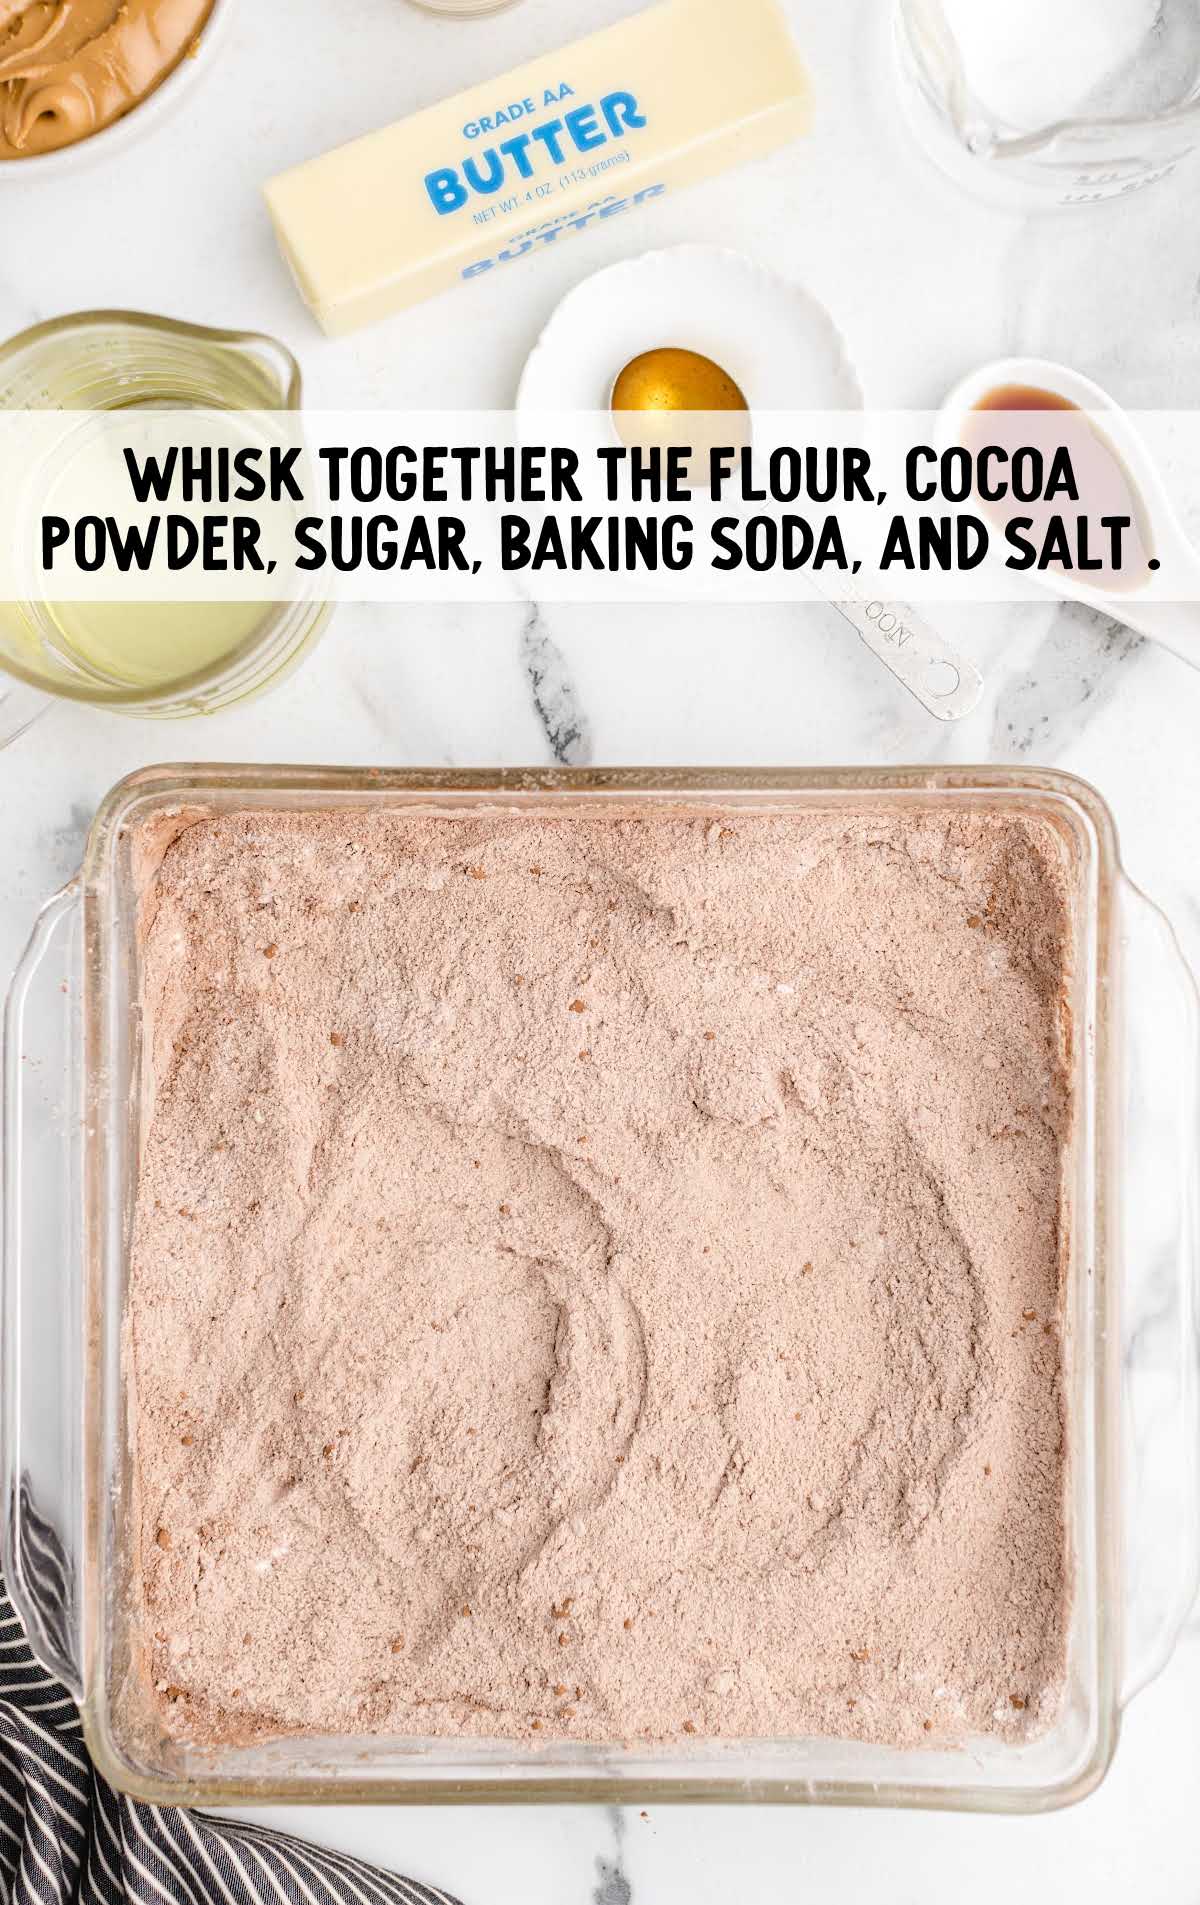 flour, cocoa powder, sugar, baking soda, and salt whisked together